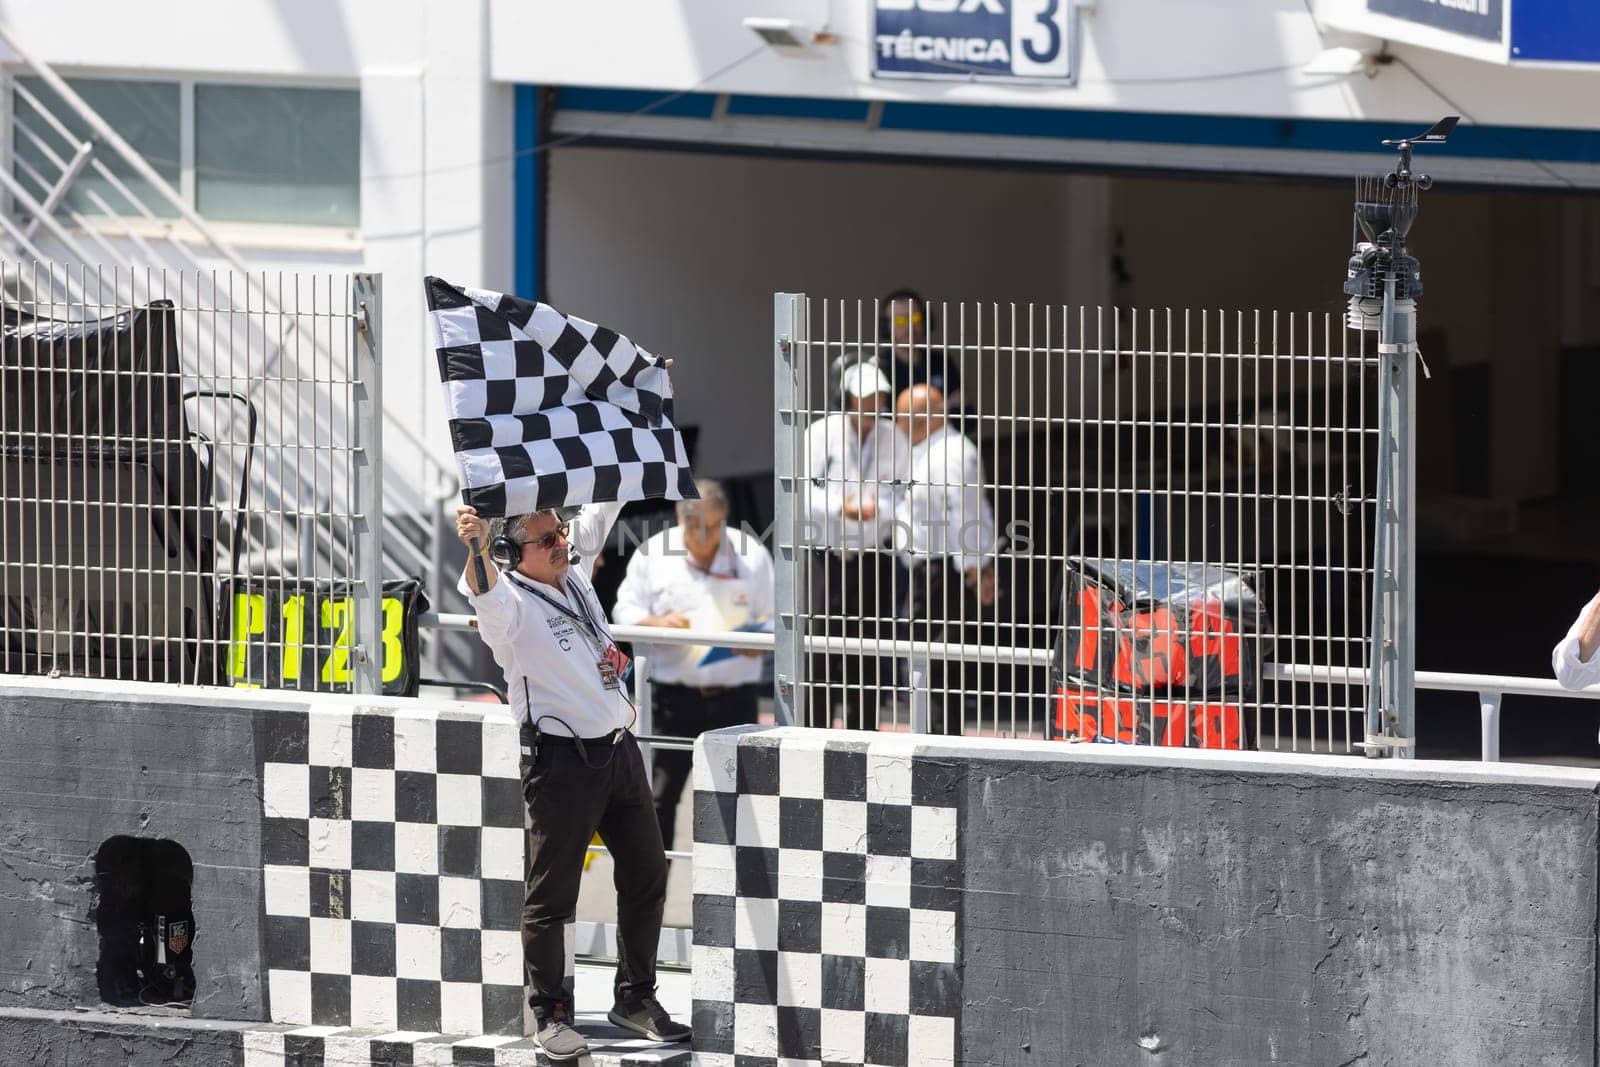 6 may 2023, Estoril, Portugal - MotoGP racing - The Race Track Guardian: A Man Protecting the Course with a Checkered Umbrella by Studia72